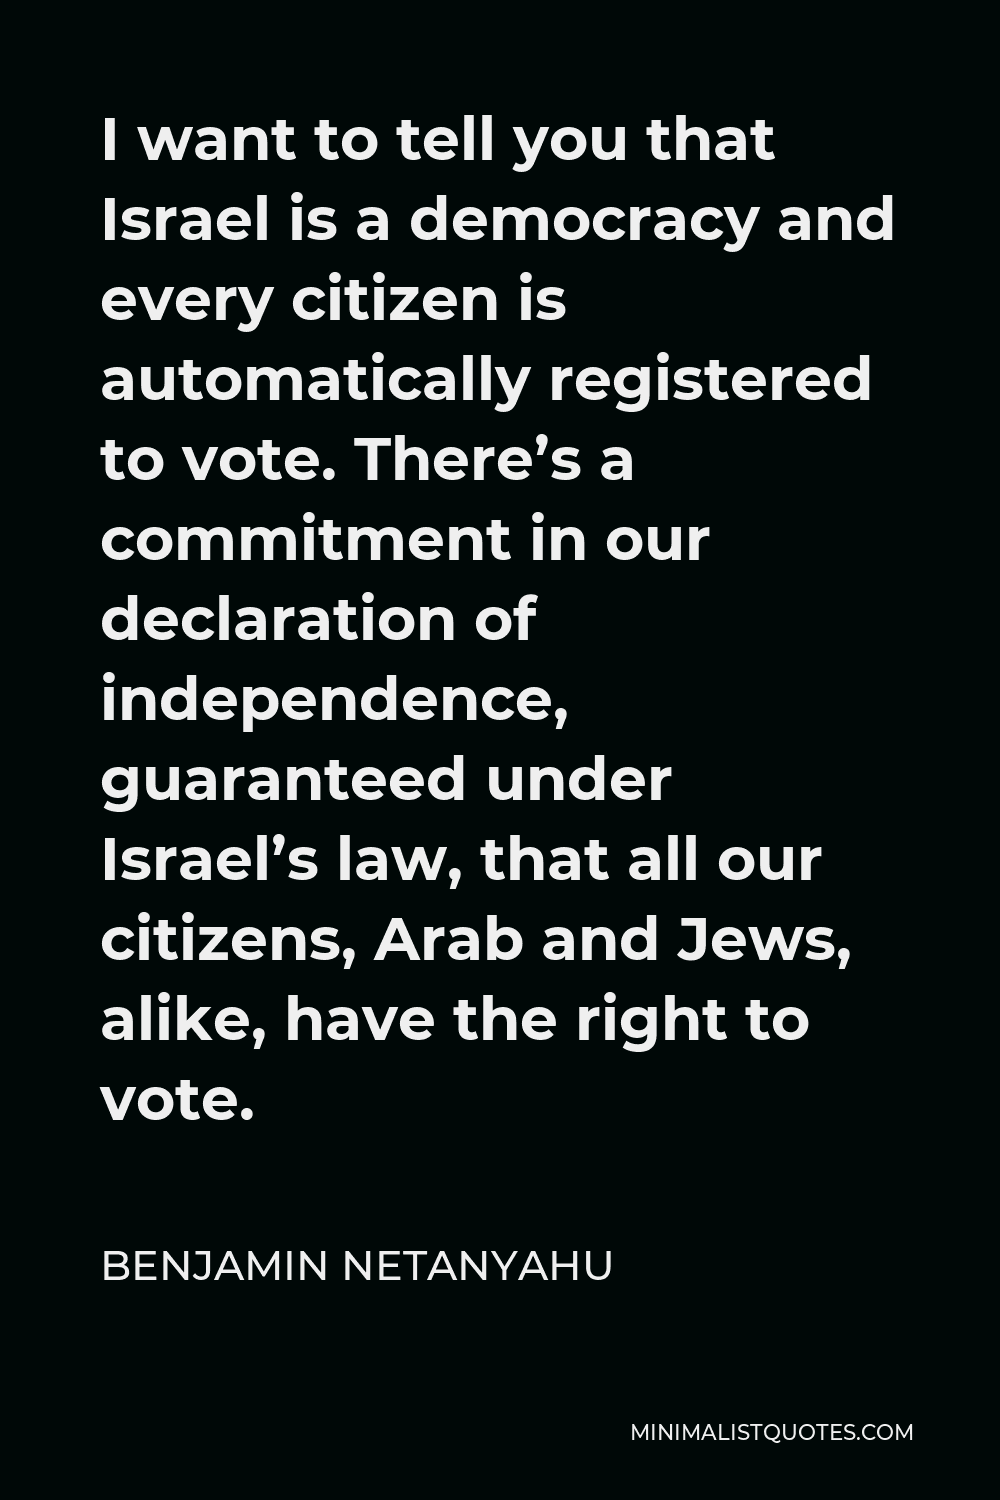 Benjamin Netanyahu Quote - I want to tell you that Israel is a democracy and every citizen is automatically registered to vote. There’s a commitment in our declaration of independence, guaranteed under Israel’s law, that all our citizens, Arab and Jews, alike, have the right to vote.